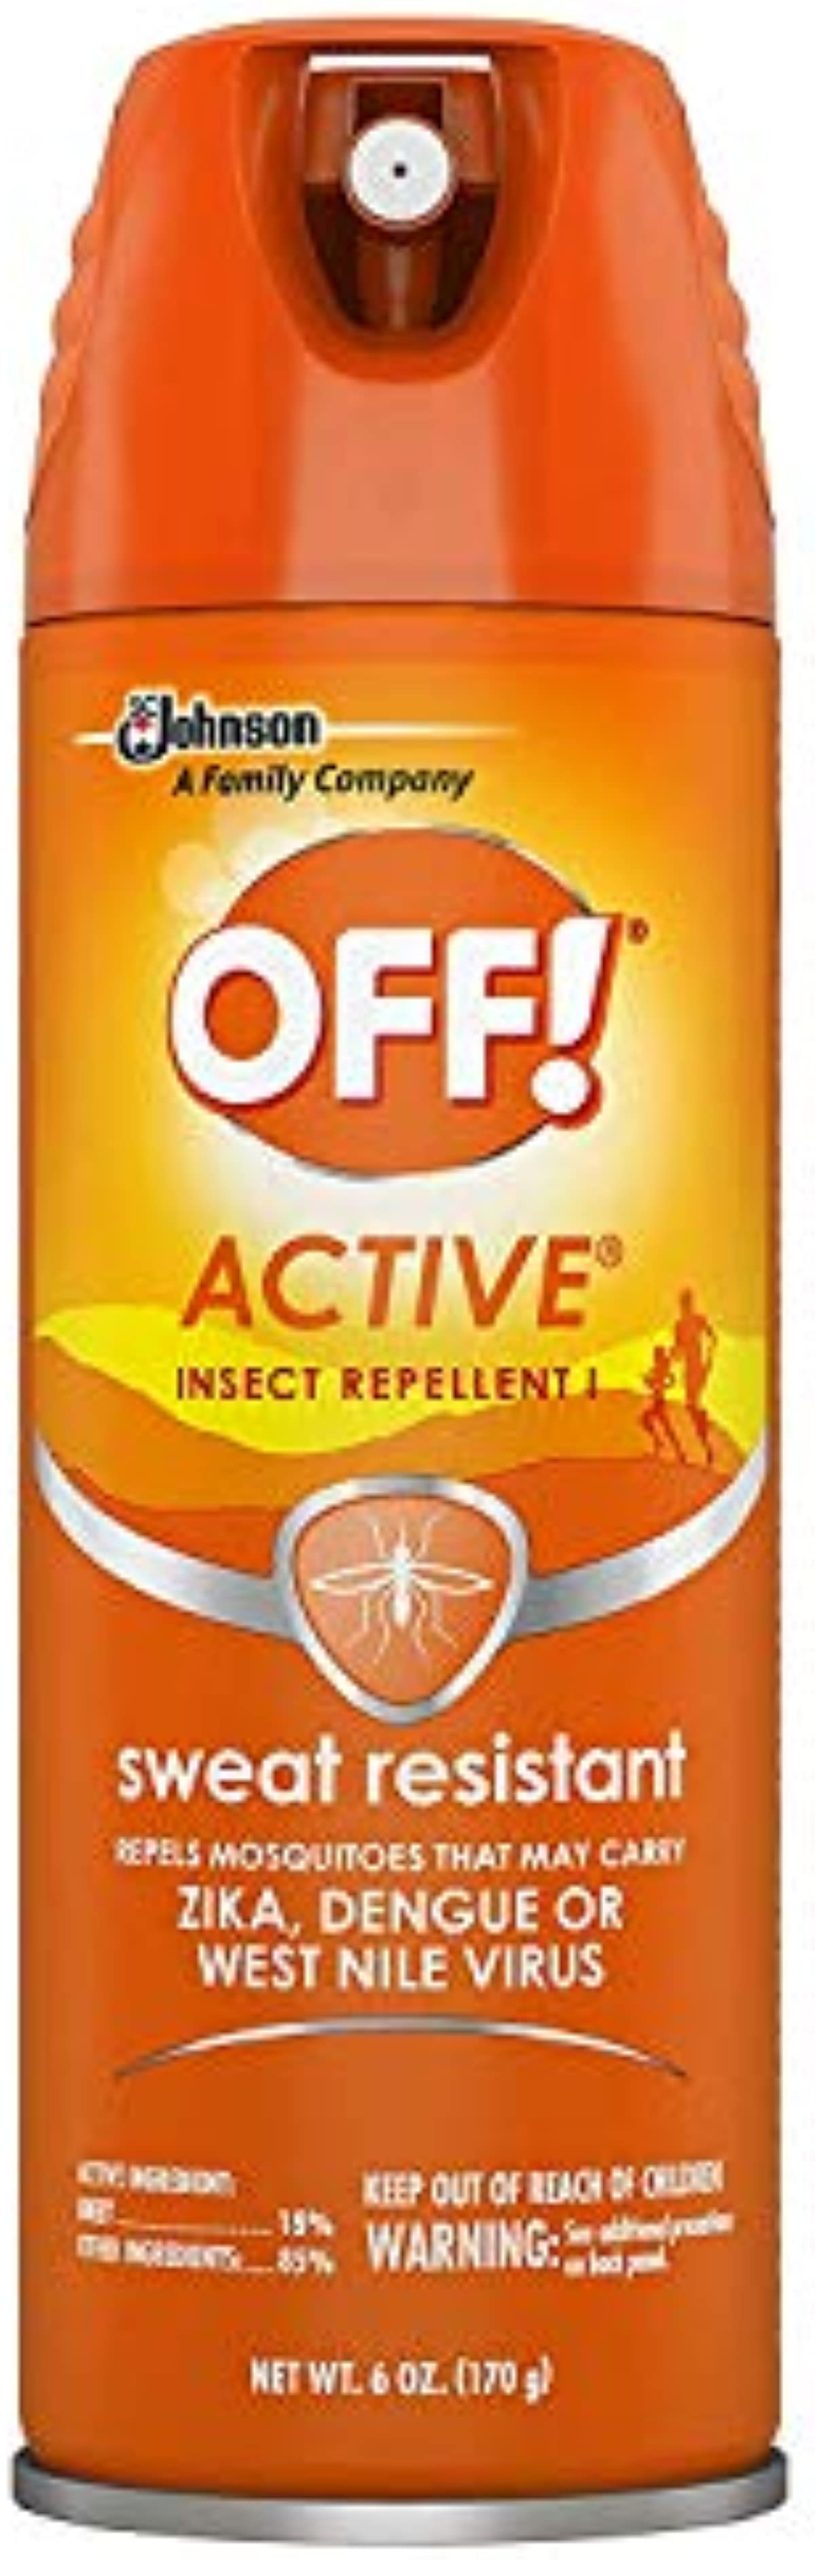 OFF! Active Insect Repellent, Sweat Resistant 6 OZ (Pack - 6)